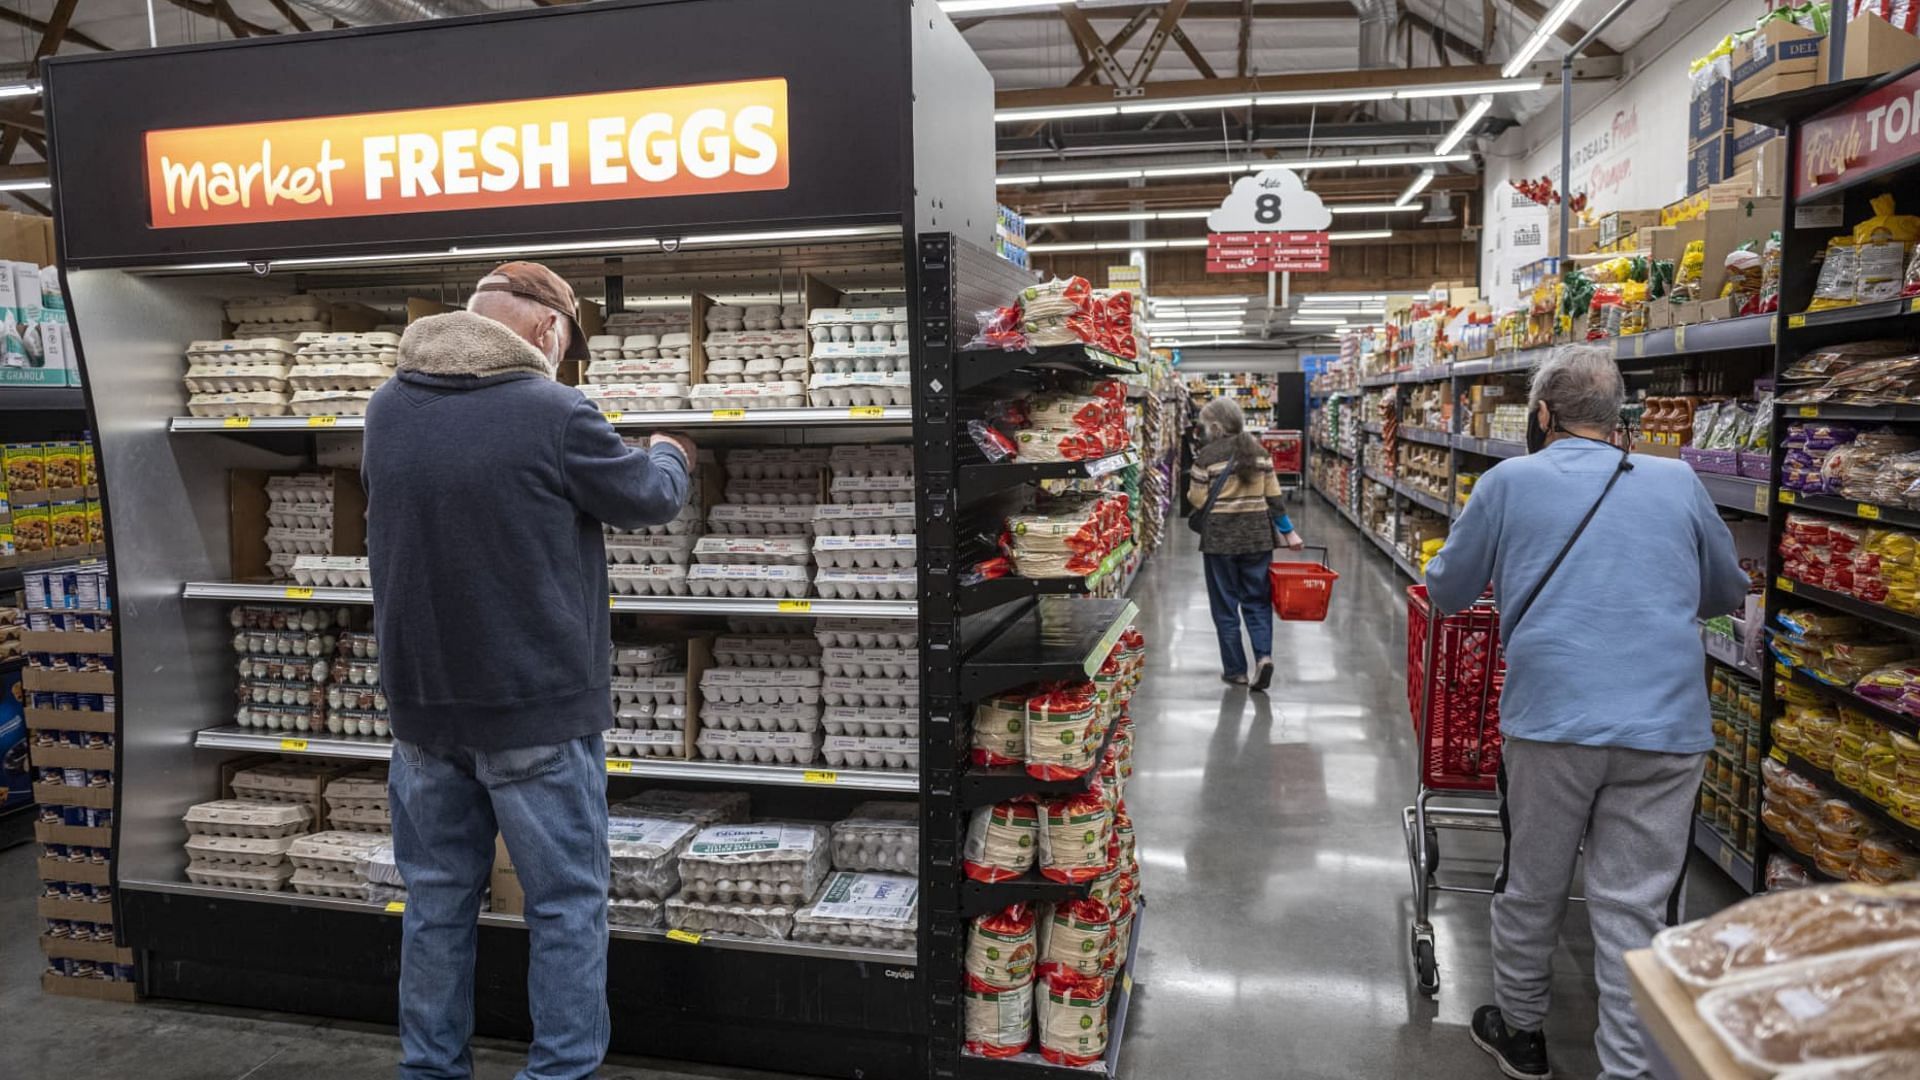 a customer picks eggs from an aisle at a Market Fresh grocery store amidst the nationwide increase in egg prices (Image via David Paul Morris/Bloomberg/Getty Images)